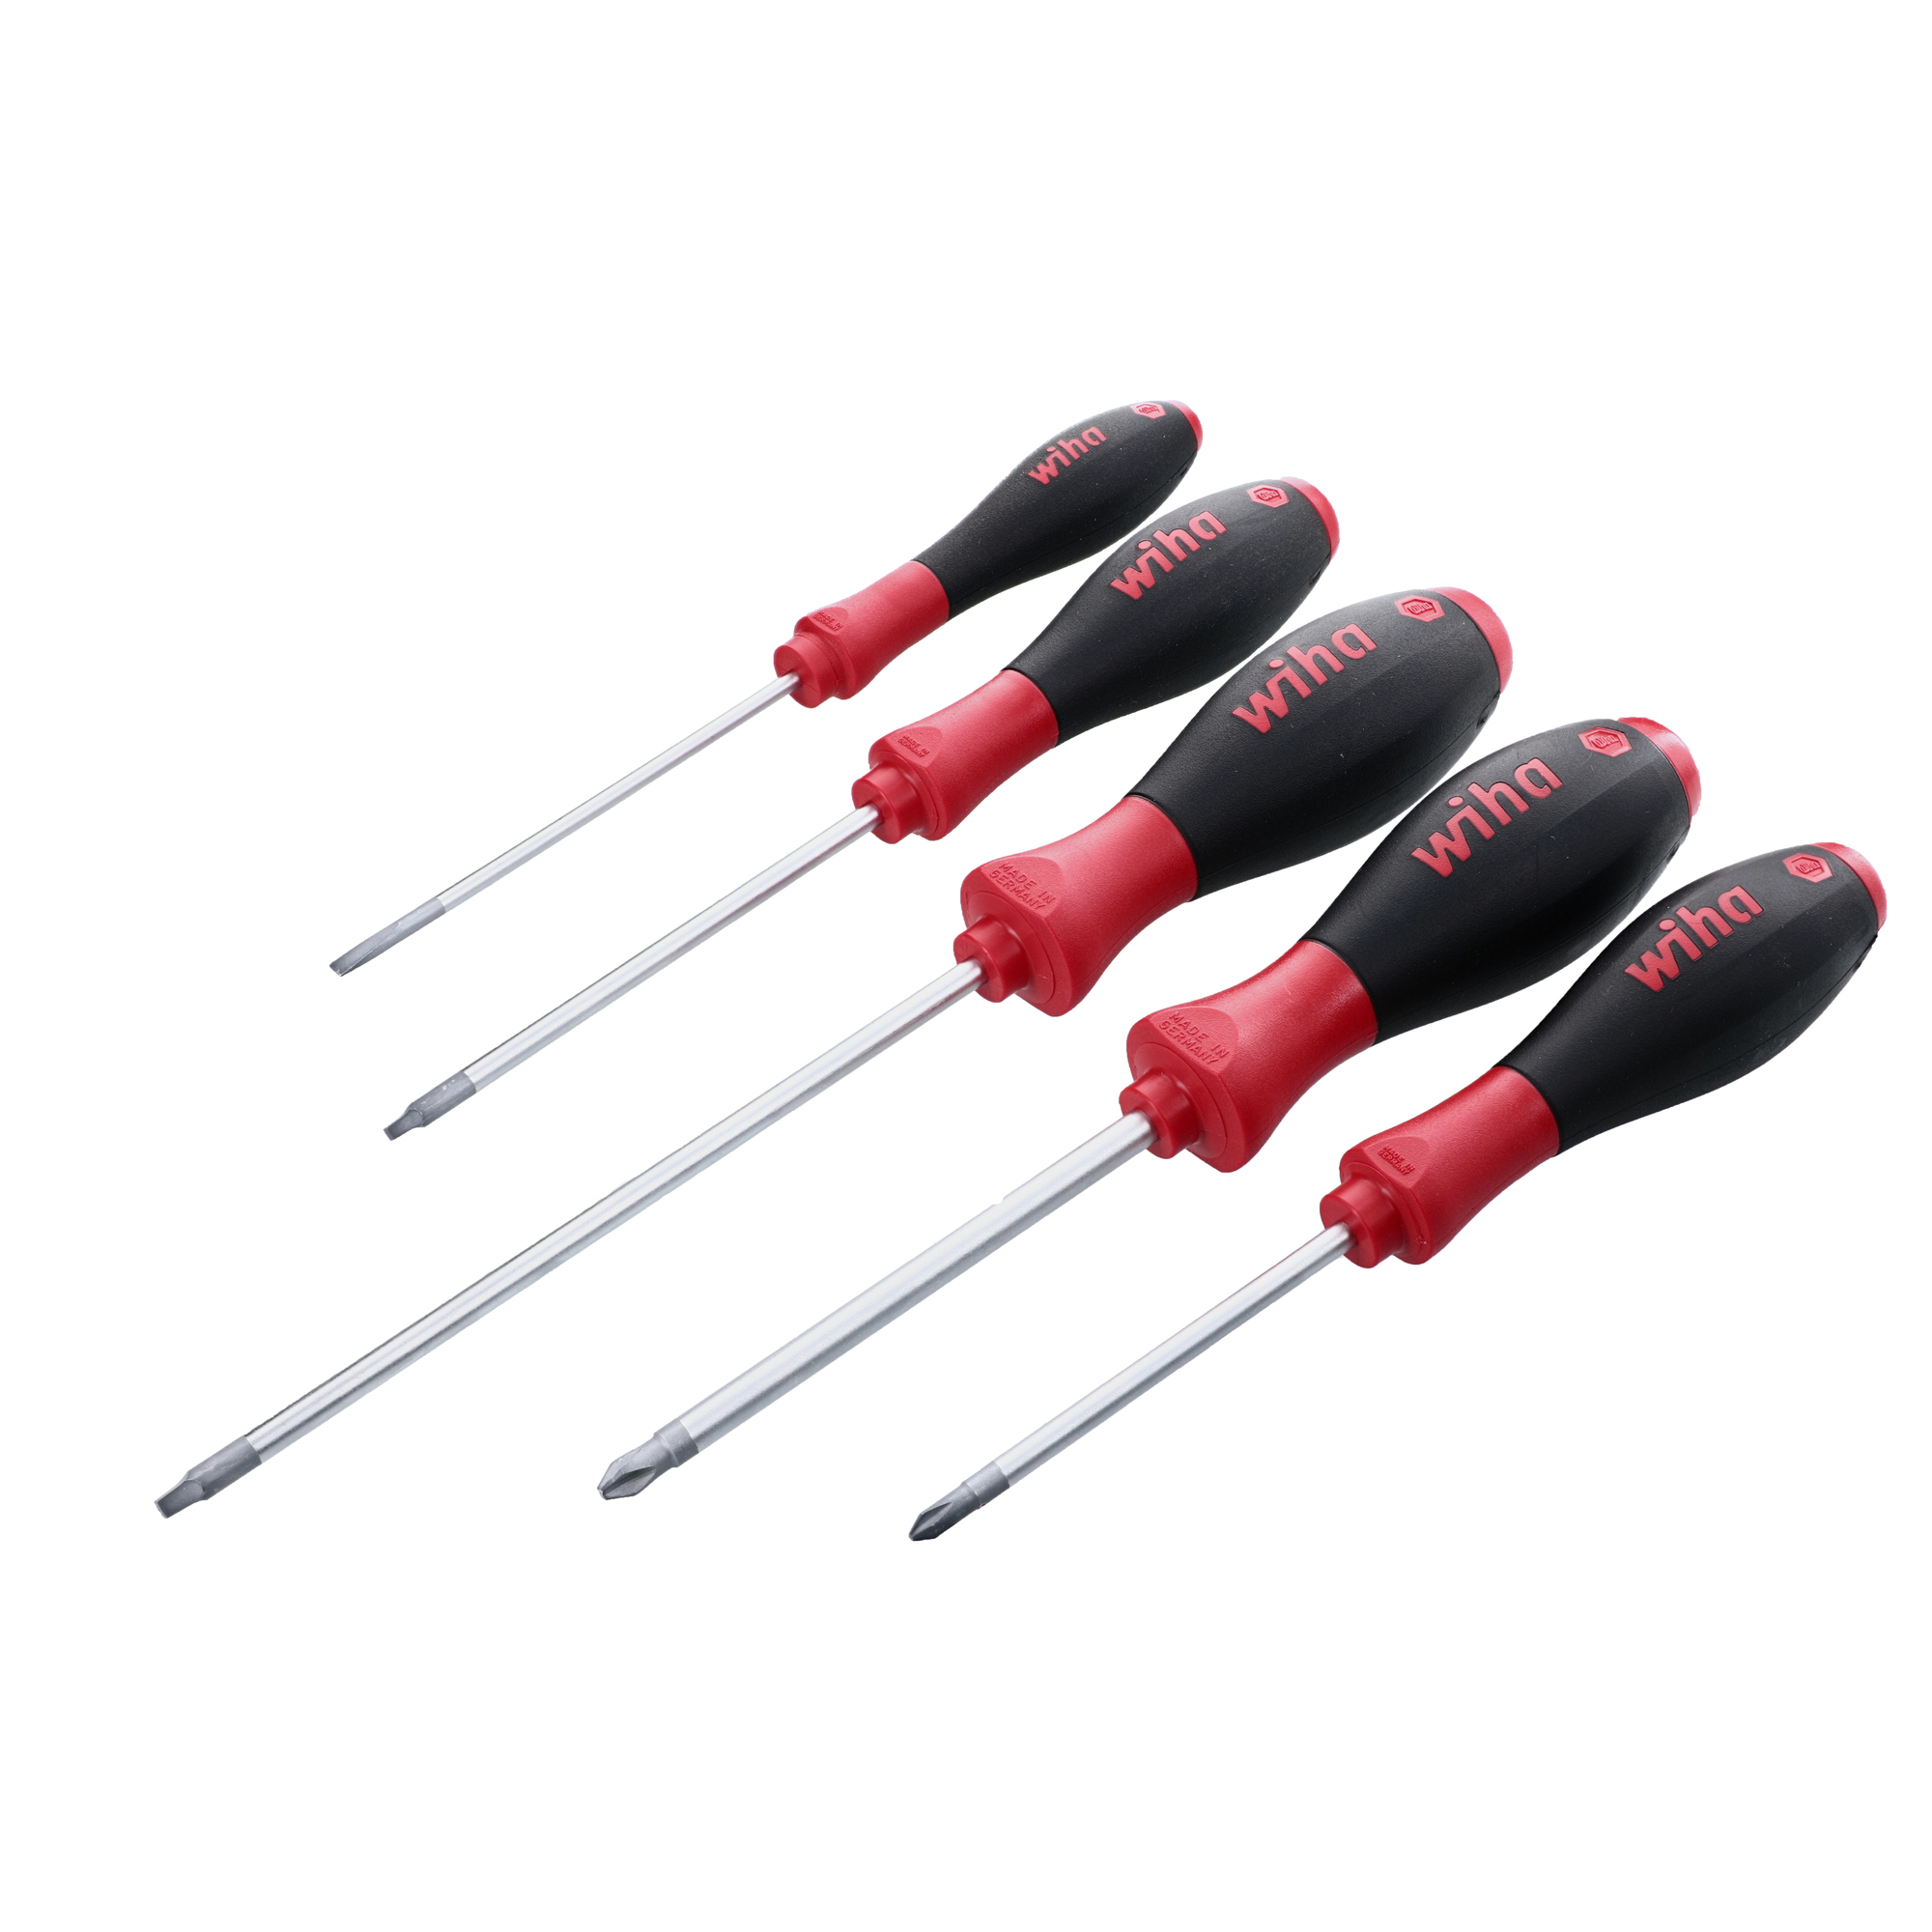 Wiha, 5PC Slotted Phillips Square Screwdriver Set, Drive Type Combination, Model 30286